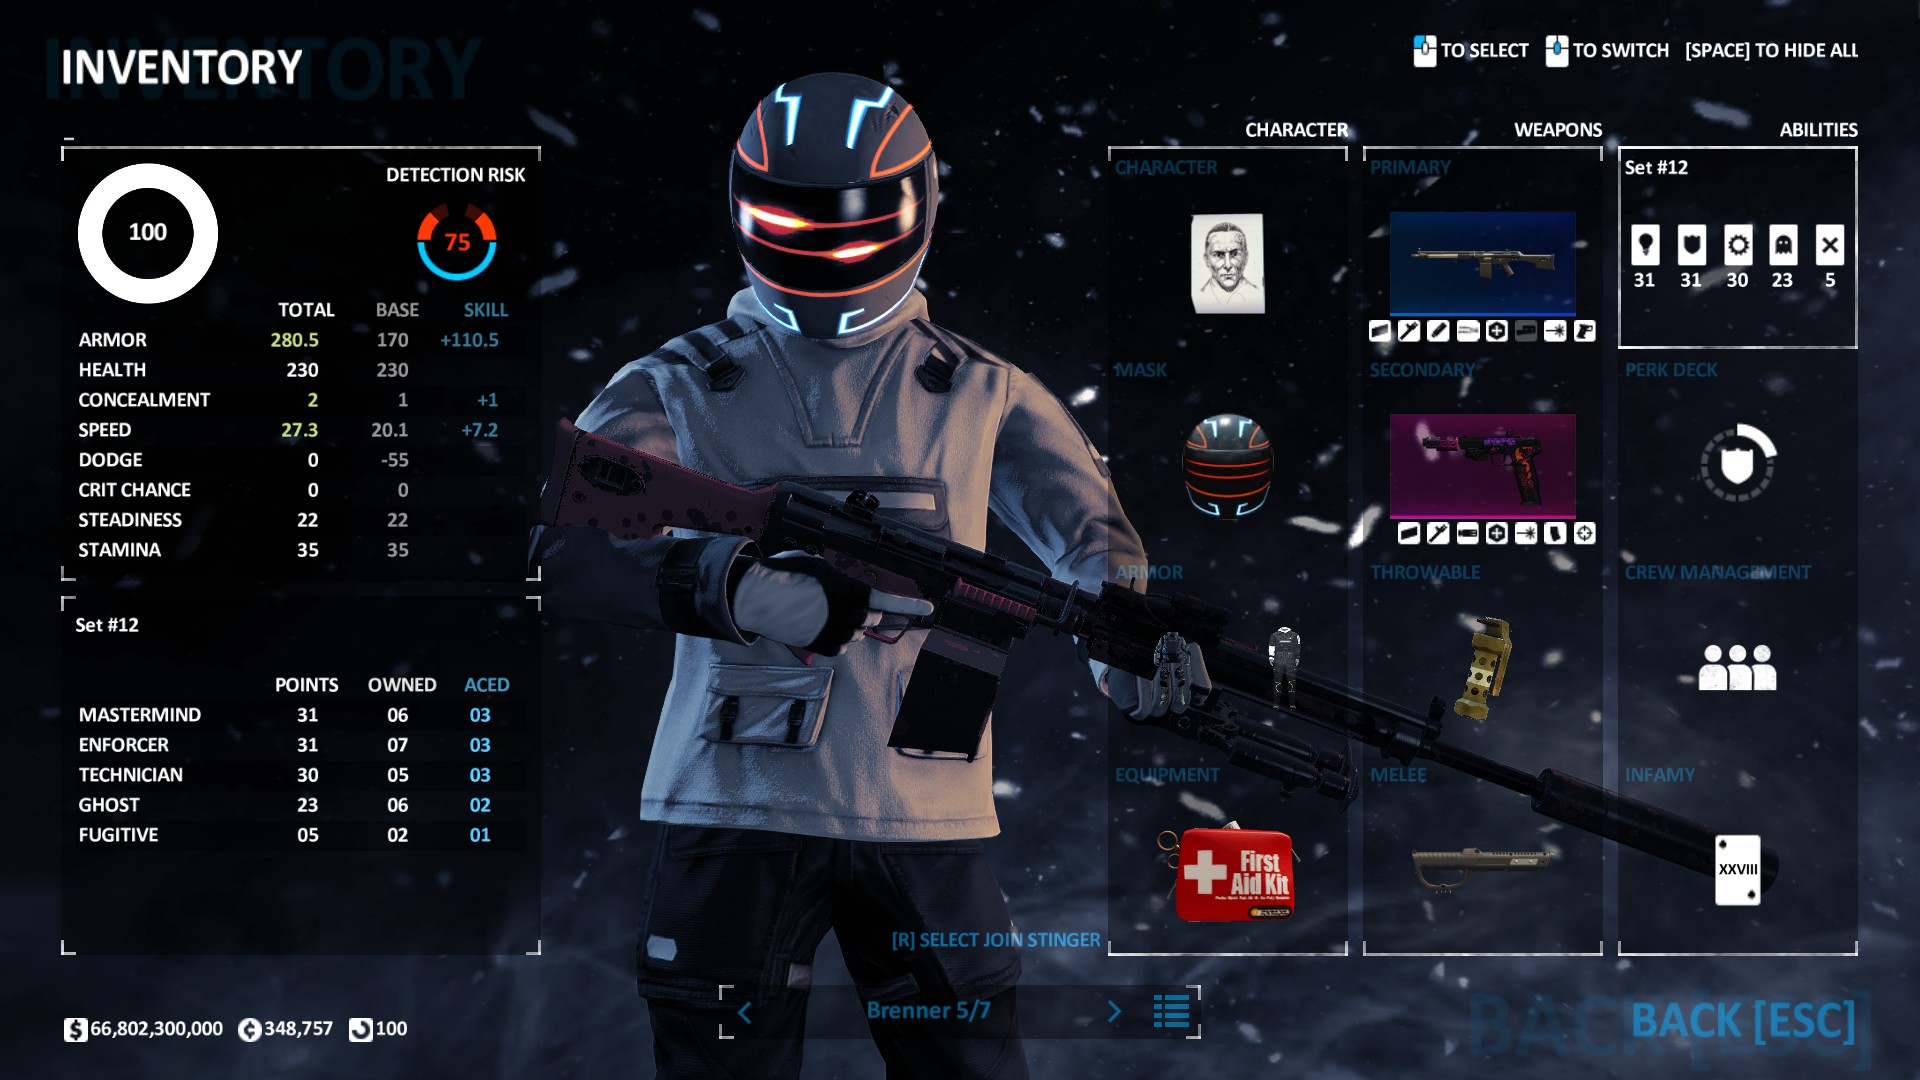 PAYDAY 2 - Death Sentence One Down Builds - Brenner-21 LMG & 5/7 AP Pistol [Armorer] (3) - 4ACF50A